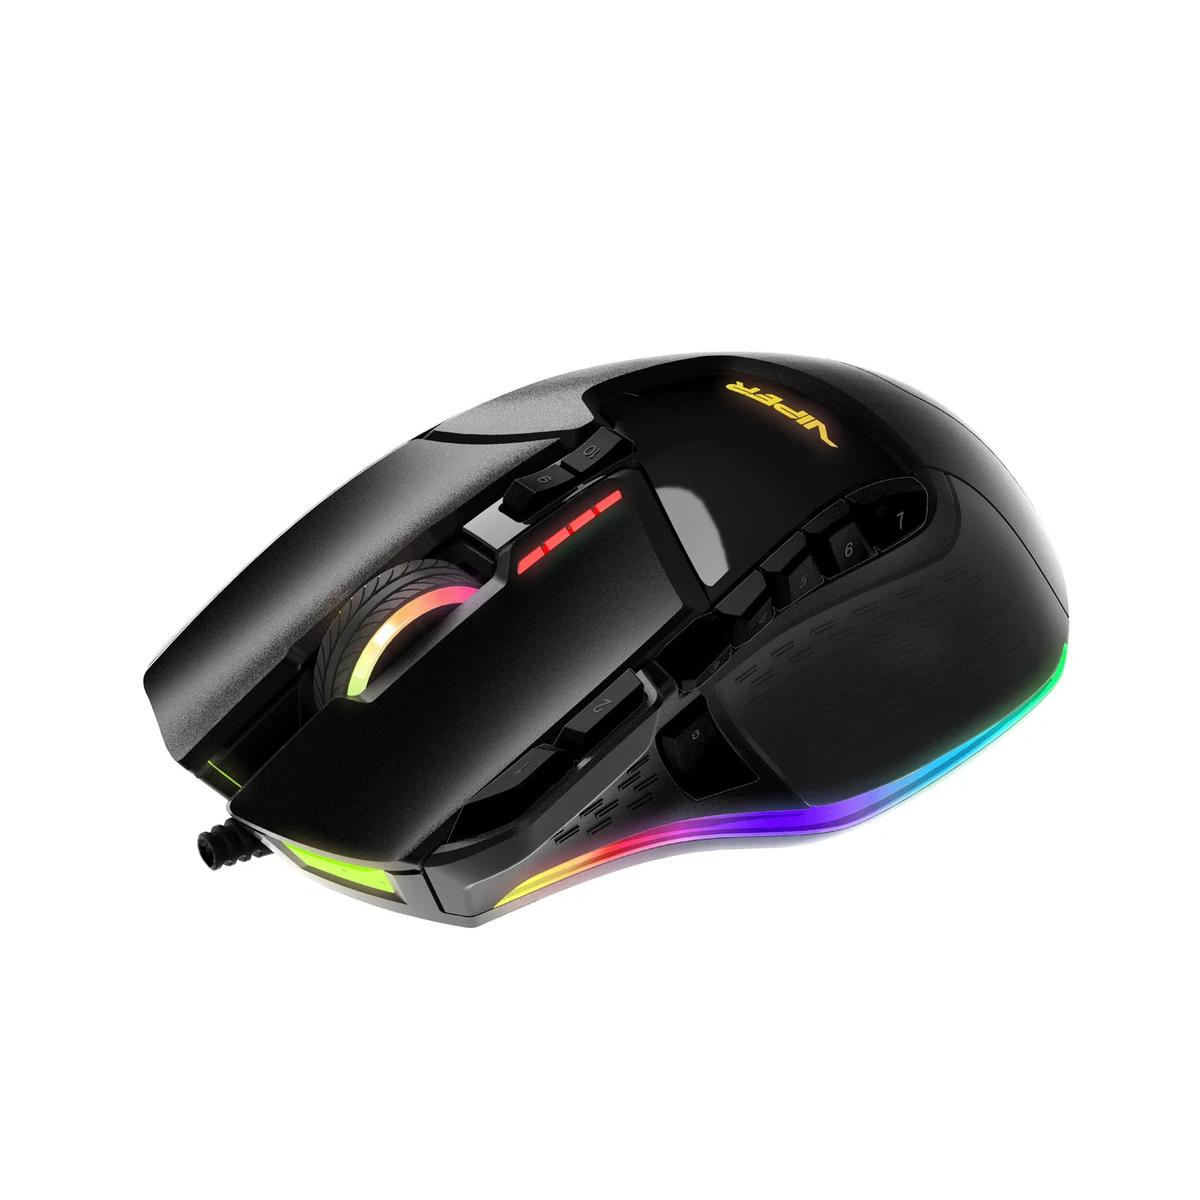 MOUSE GAMING VIPER V570 BLACKOUT EDITION 12000 DPI RGB CON SOFTWARE PERSONALIZABLE FPS MMO HIBRIDO 13 BOTONES - PATRIOT